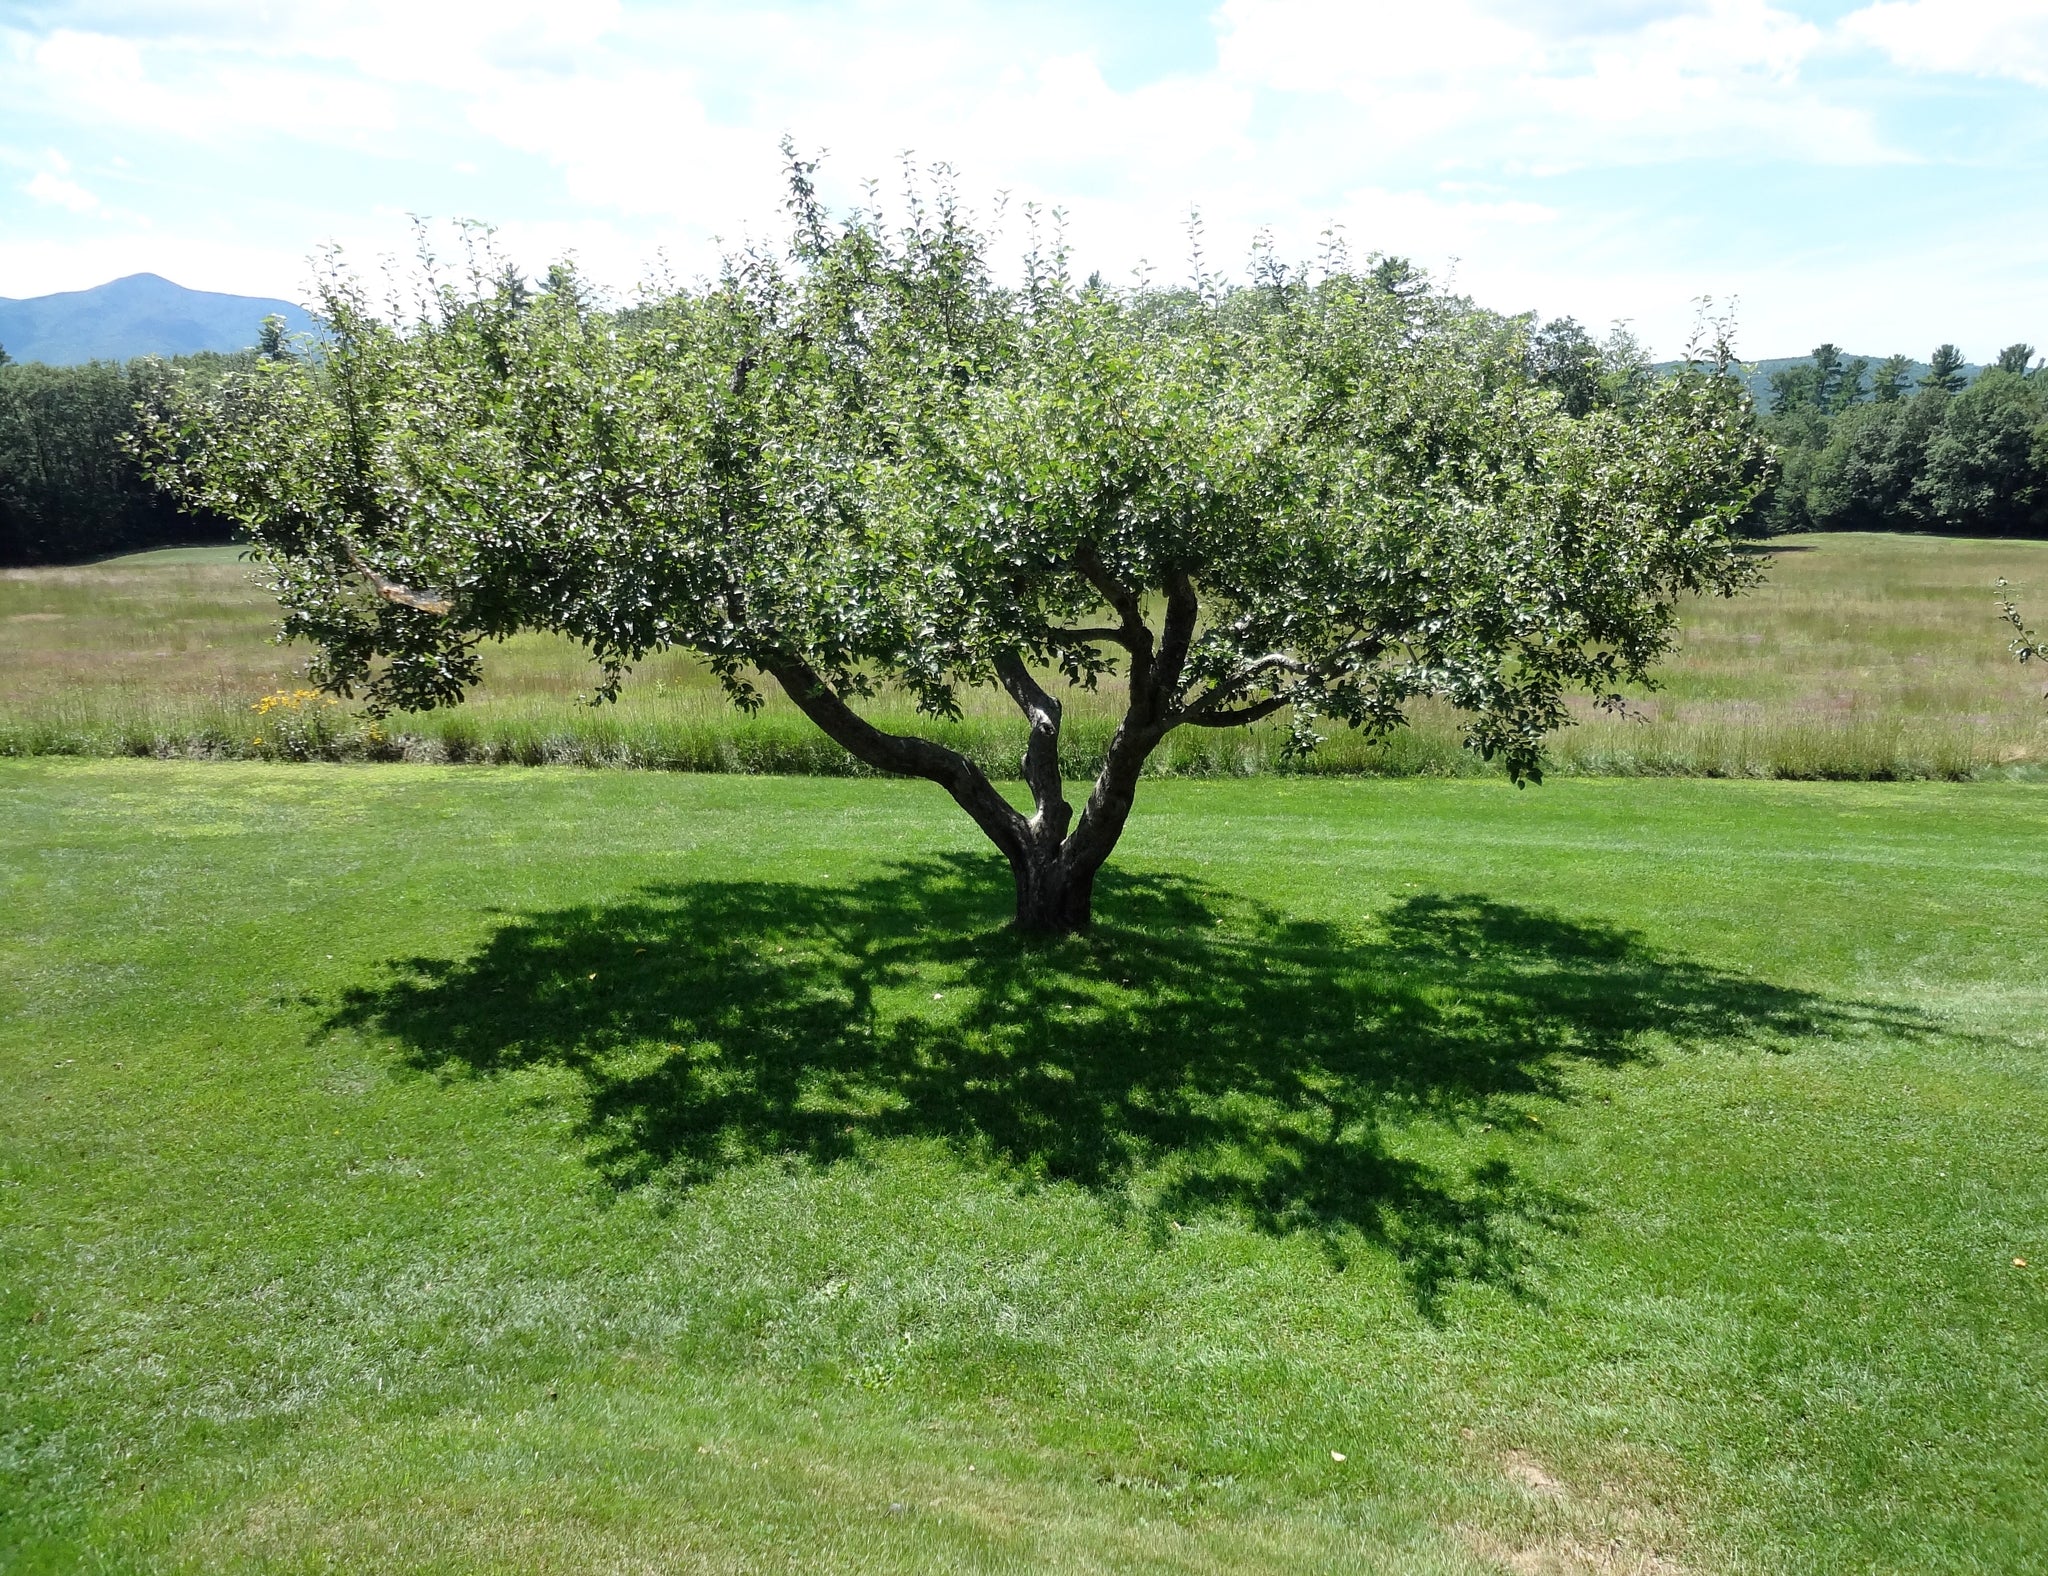 3 ft. Golden Delicious Apple Tree with Honeyed Sweet Light Gold Fruit